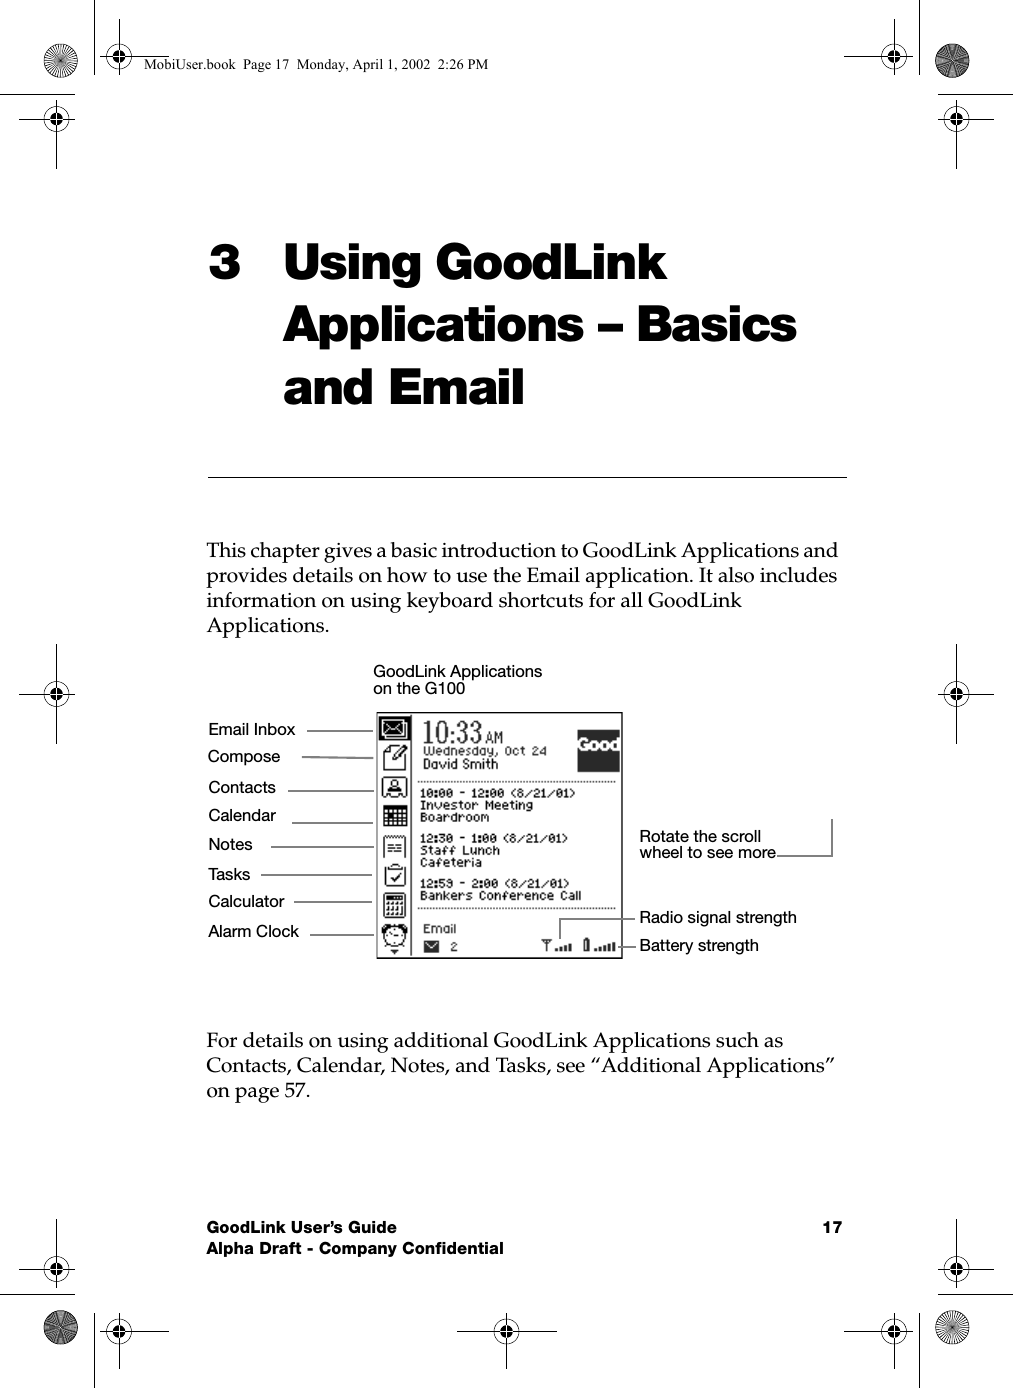 GoodLink User’s Guide 17Alpha Draft - Company Confidential3 Using GoodLink Applications – Basics and EmailThis chapter gives a basic introduction to GoodLink Applications and provides details on how to use the Email application. It also includes information on using keyboard shortcuts for all GoodLink Applications.For details on using additional GoodLink Applications such as Contacts, Calendar, Notes, and Tasks, see “Additional Applications” on page 57.ContactsCalculatorTasksCalendarEmail InboxNotesAlarm ClockComposeBattery strengthRadio signal strengthRotate the scroll wheel to see more GoodLink Applications on the G100MobiUser.book  Page 17  Monday, April 1, 2002  2:26 PM